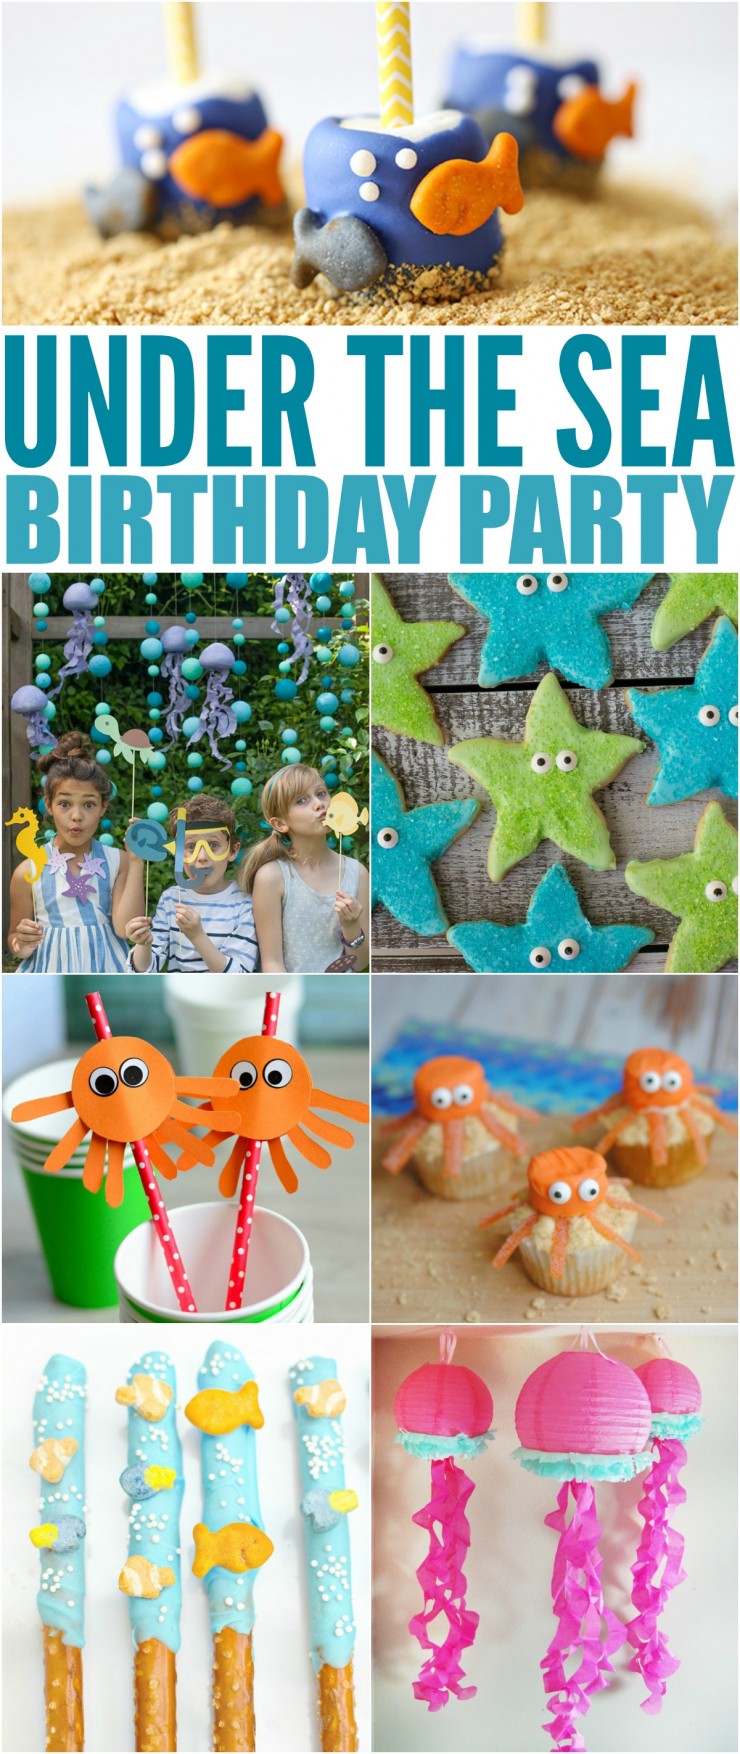 How to Throw the Ultimate Under the Sea Birthday Party to please any birthday girl or boy. Check out these 25 ideas that will help you throw an amazing Under the Sea themed party for girls and boys! These ideas are great to adapt for other party themes too! Think Little Mermaid, Bubble Guppies, Finding Nemo and more!